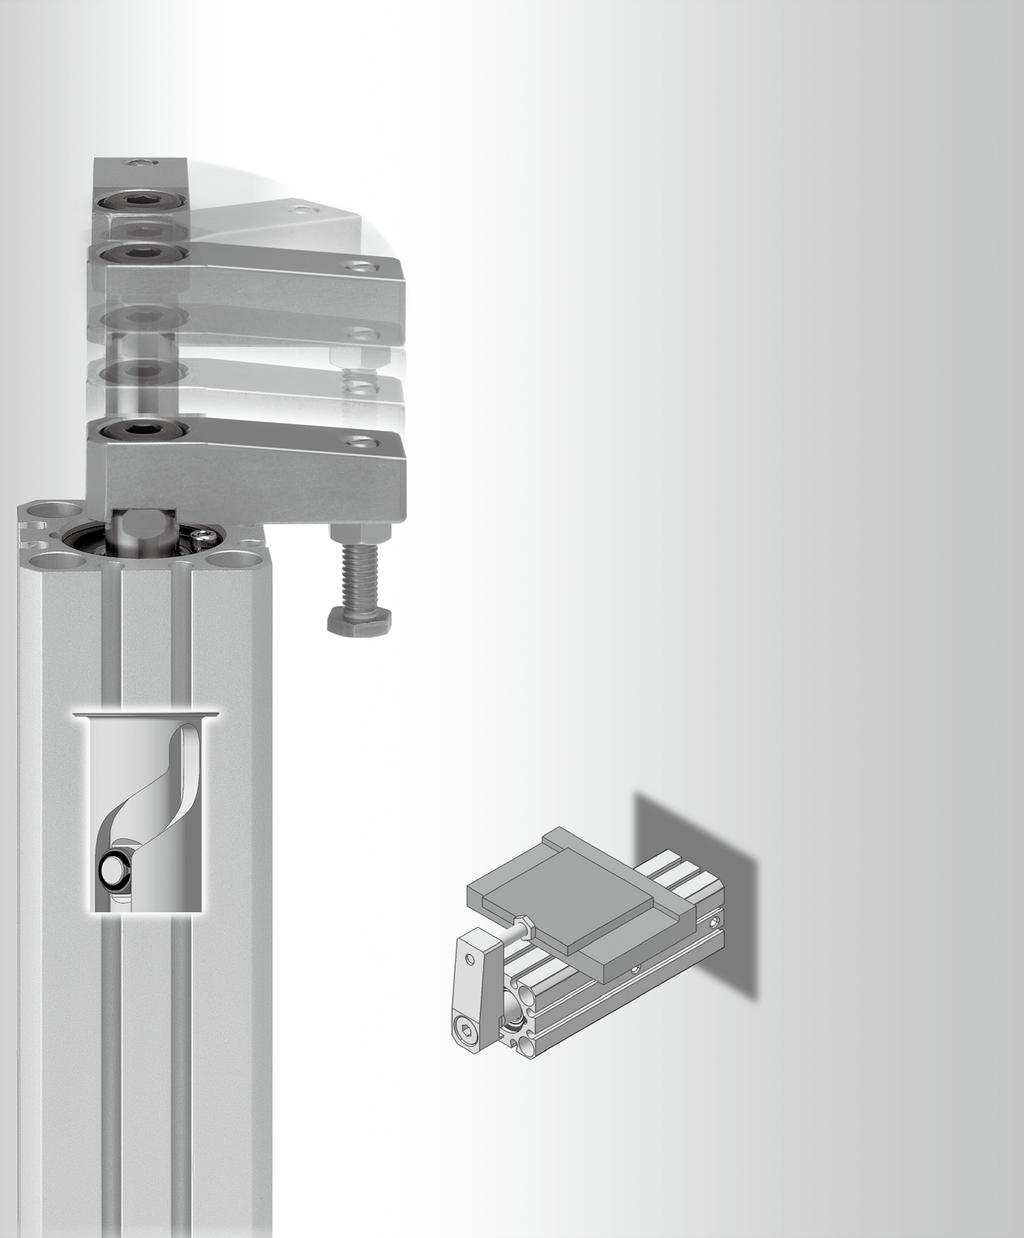 otary lamp ylinder Series Double Guide Type otation mechanism uses guide rollers. otation mechanism Non-rotating accuracy: ±0.9 ±0. (lamp part) Values for ø3, ø.